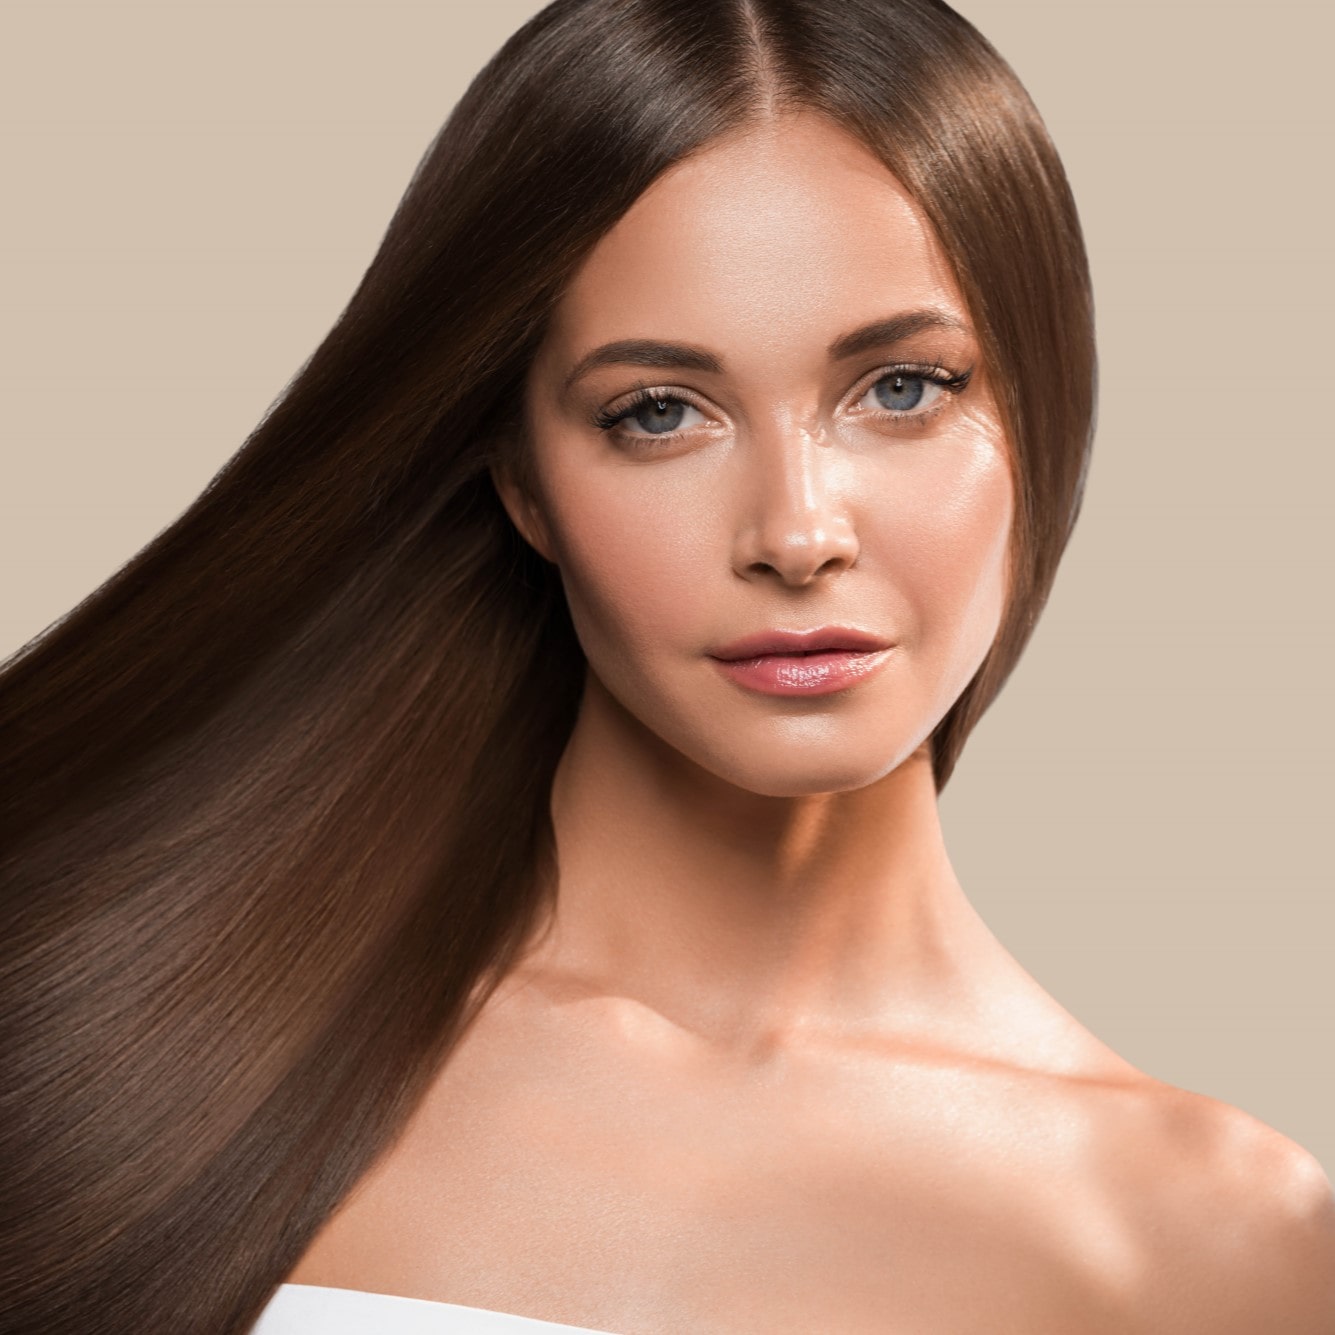 American smoothing hair straightening service in Brussels, Belgium for women